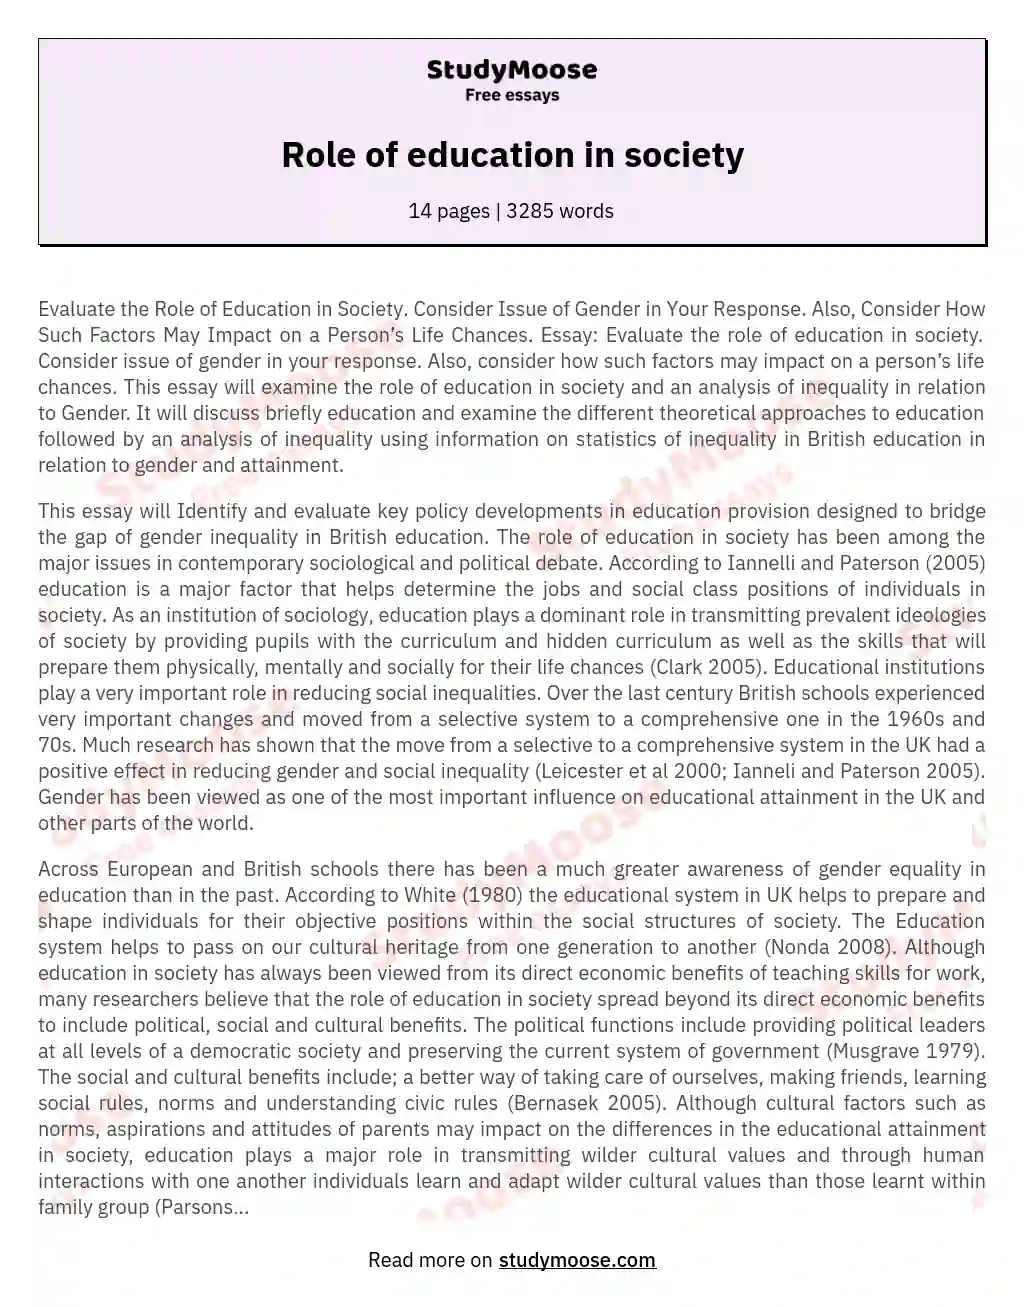 Role of education in society essay